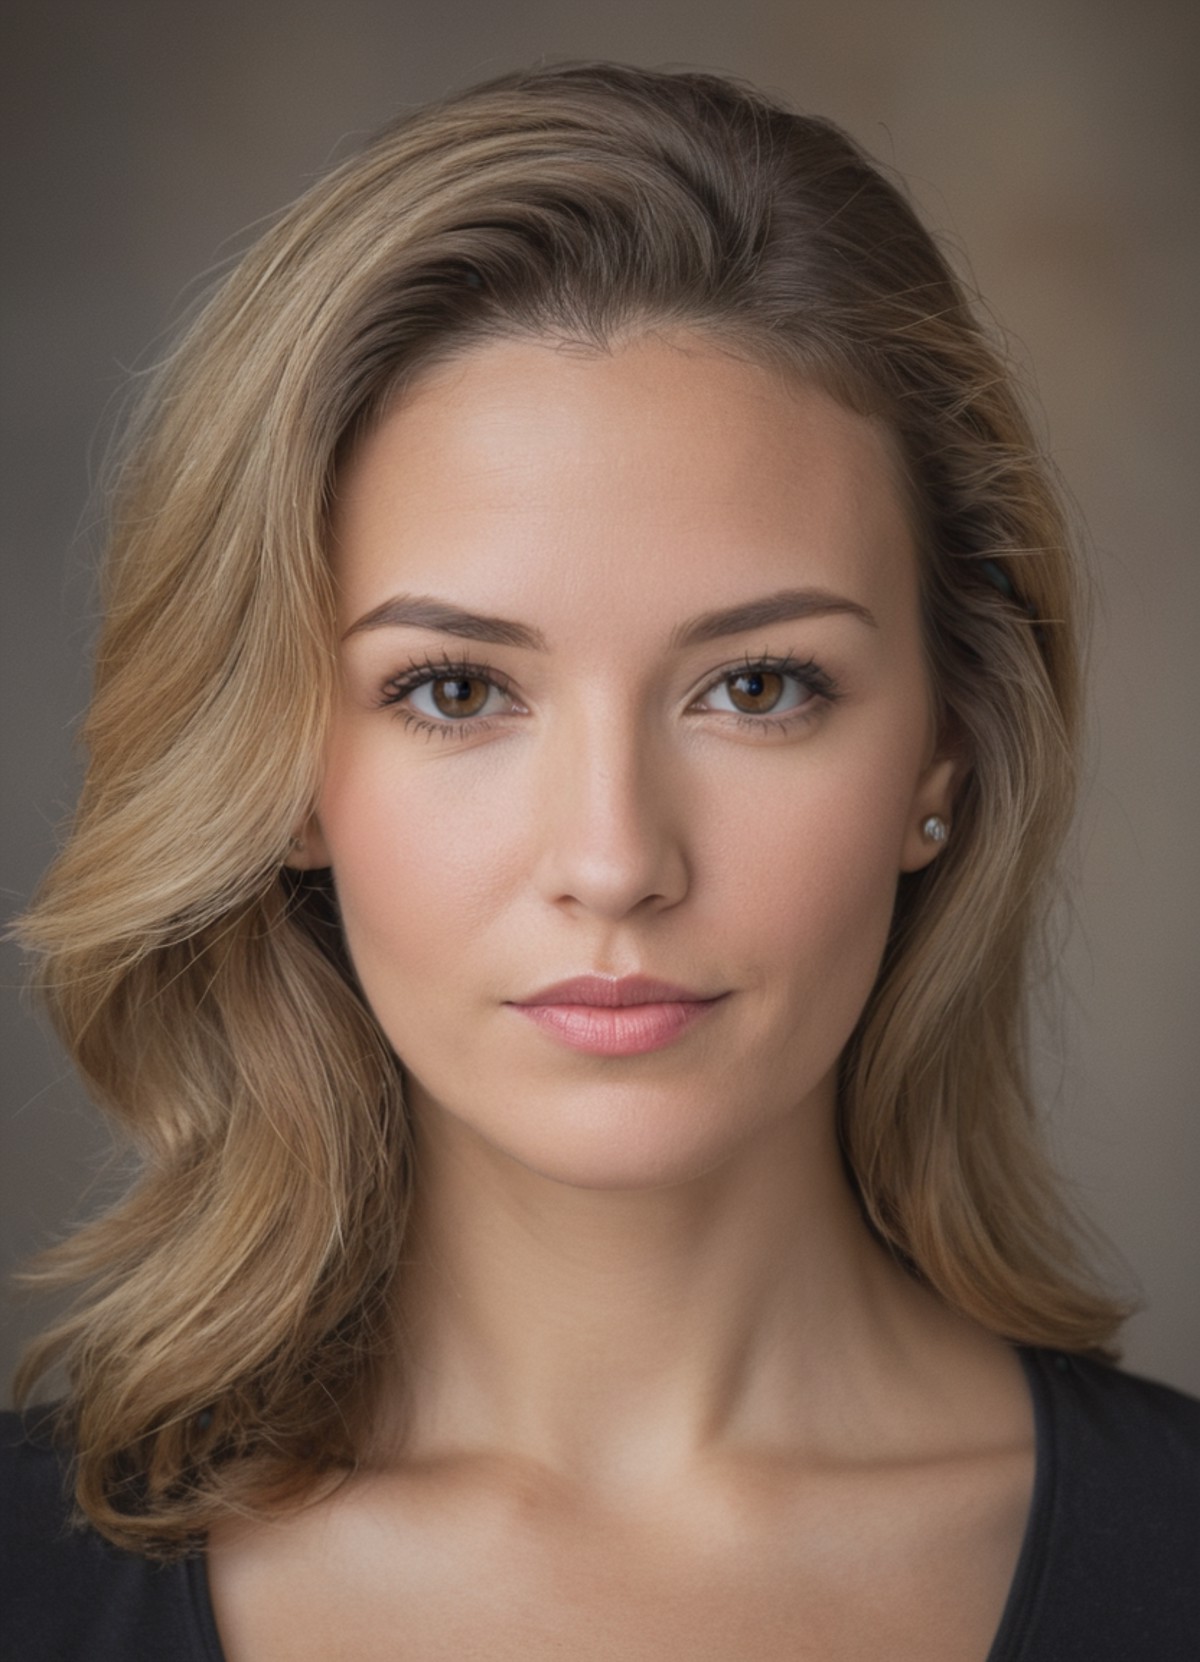 a woman posing for a headshot,
Photorealistic, realistic, Canon 5D Mark IV 85mm f/1.8